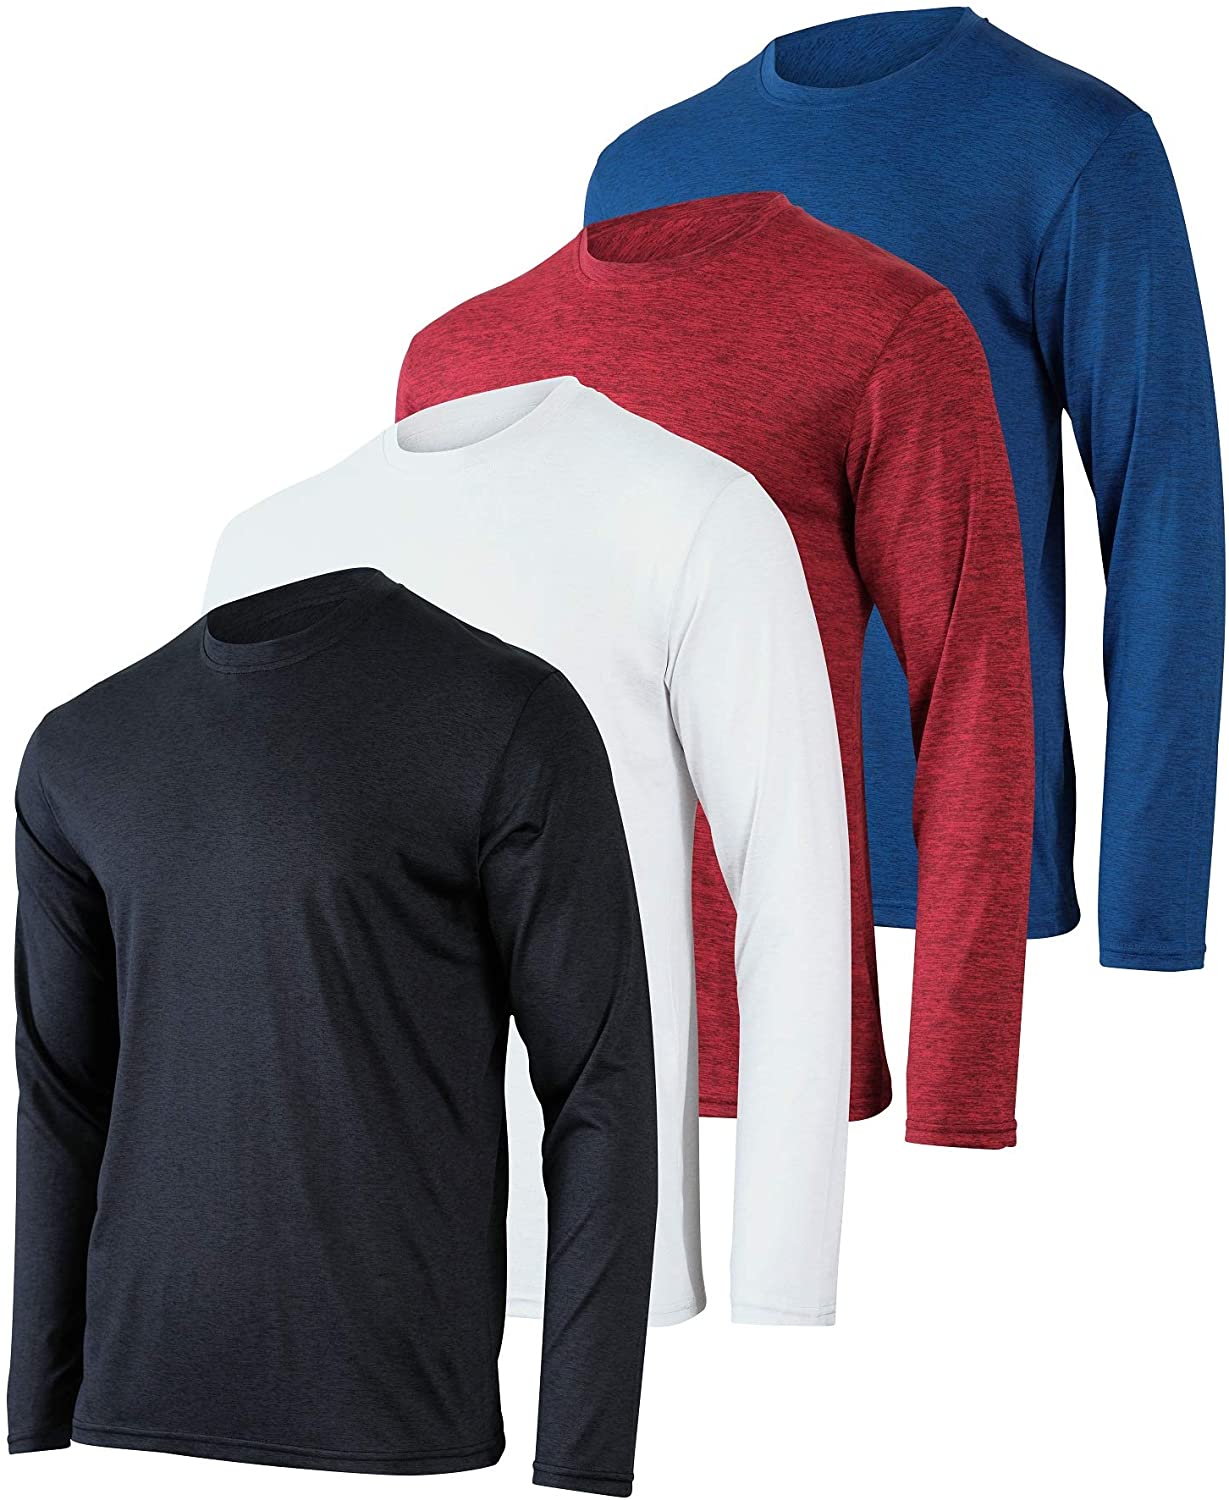 Sports & Outdoors, Breathable fishing shirts long sleeve WholeSale - Price  List, Bulk Buy at